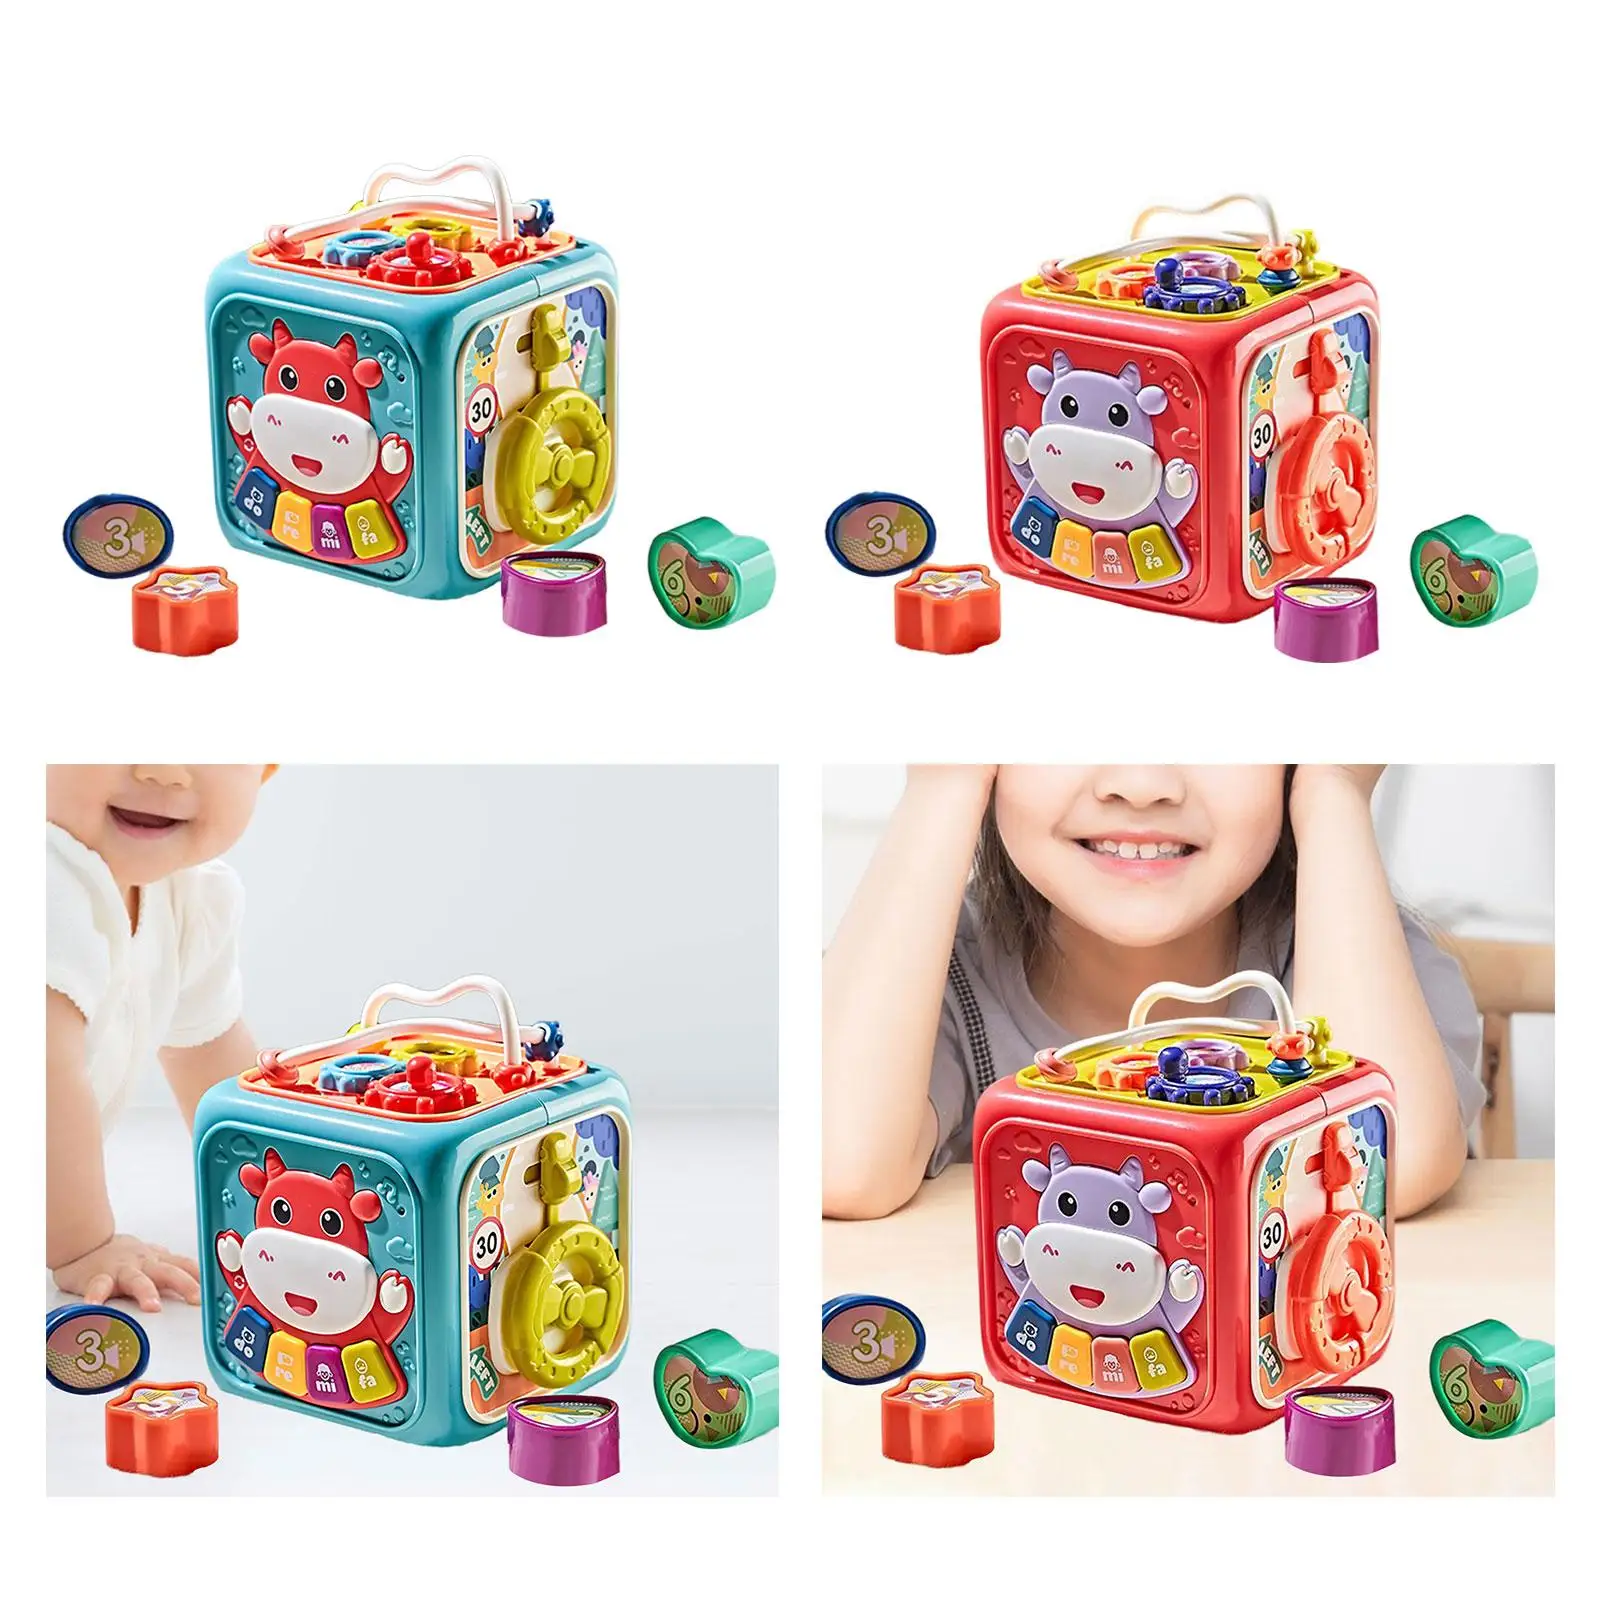 Baby Toy 6 in 1 Learning Puzzle Toy Activity Cube Toy for Birthday Gift Boys Girls 6 Month Old Baby Toys 12-18 Months